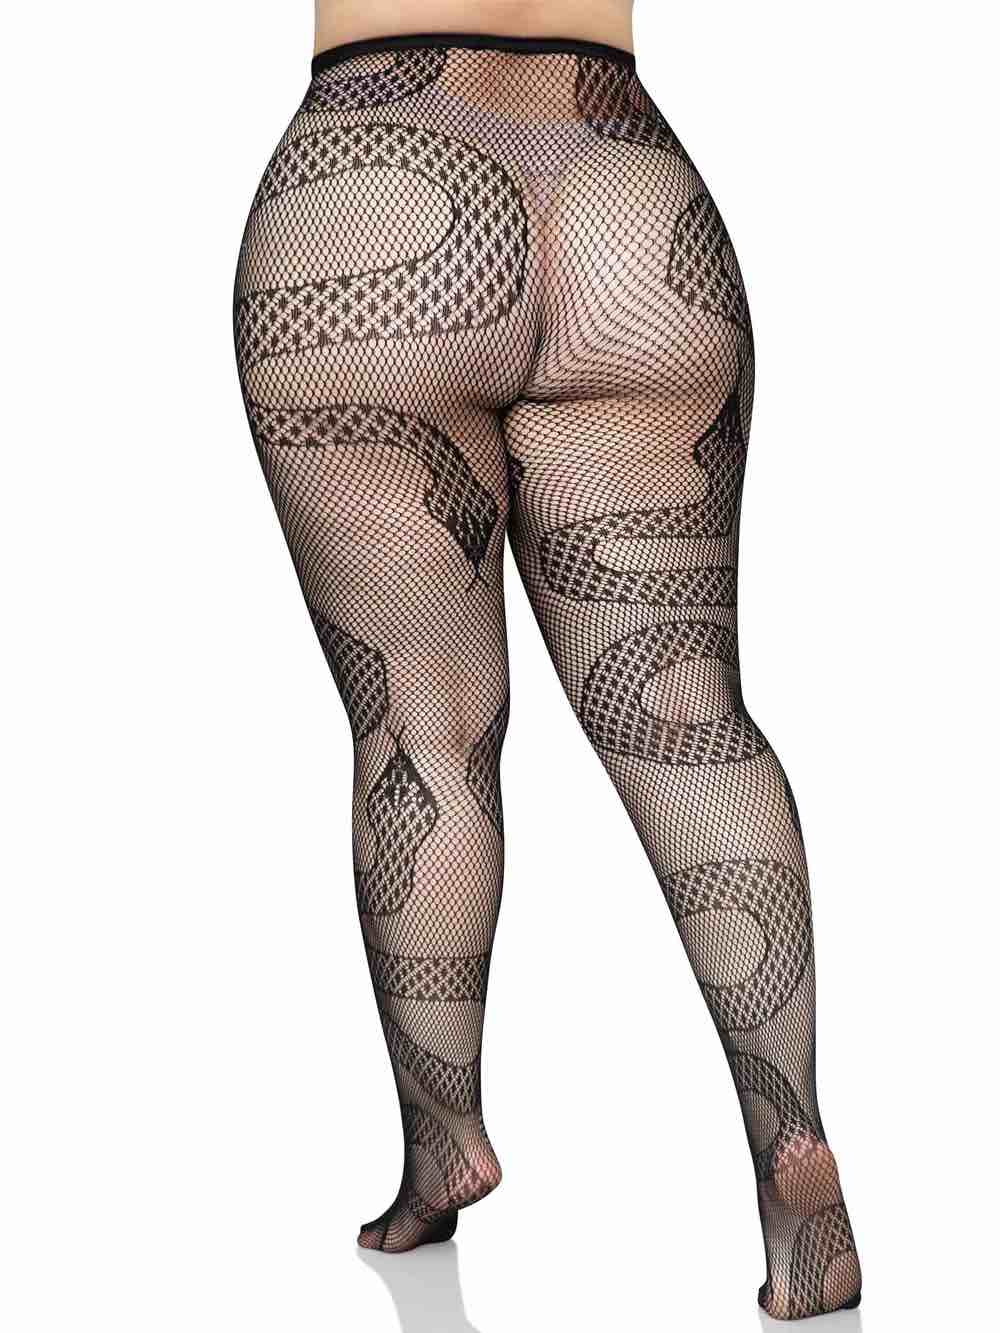 A plus size model wearing the Snake Net Tights over a nude thong, rear view.